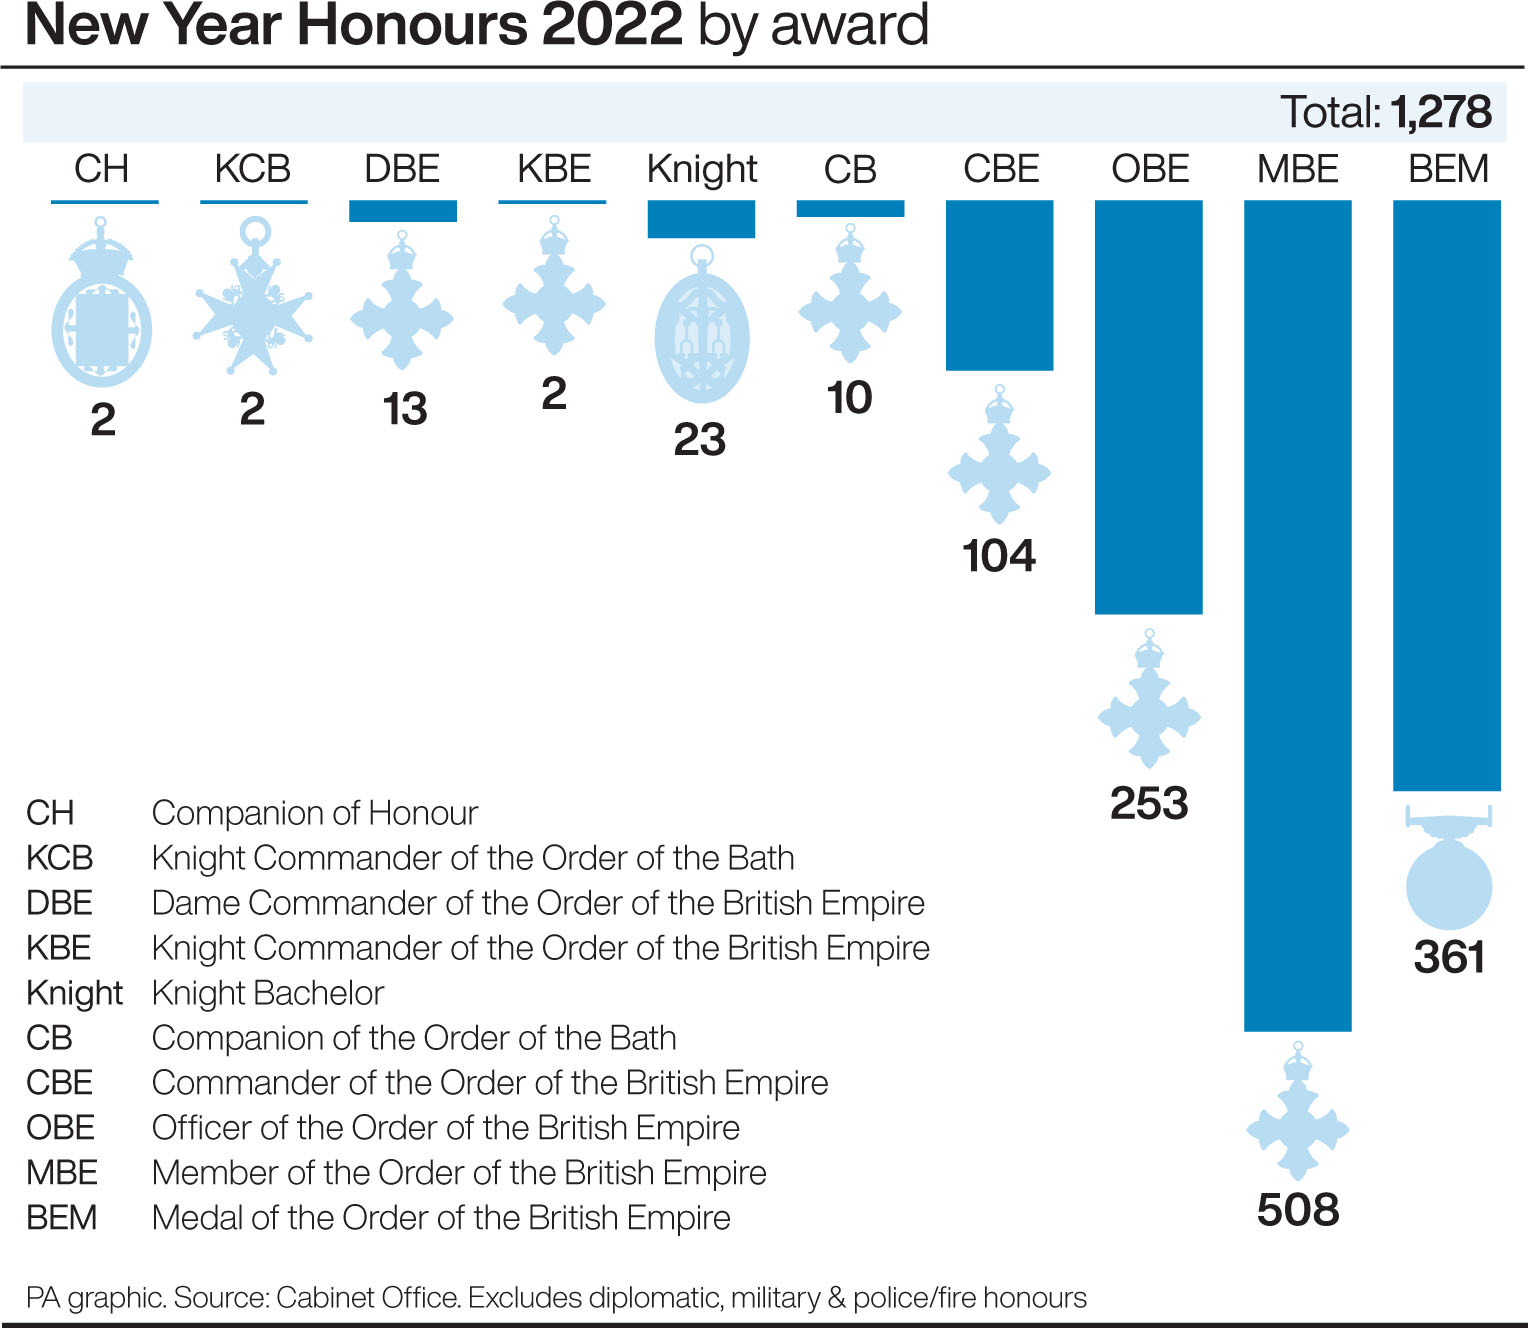 Honours by award 